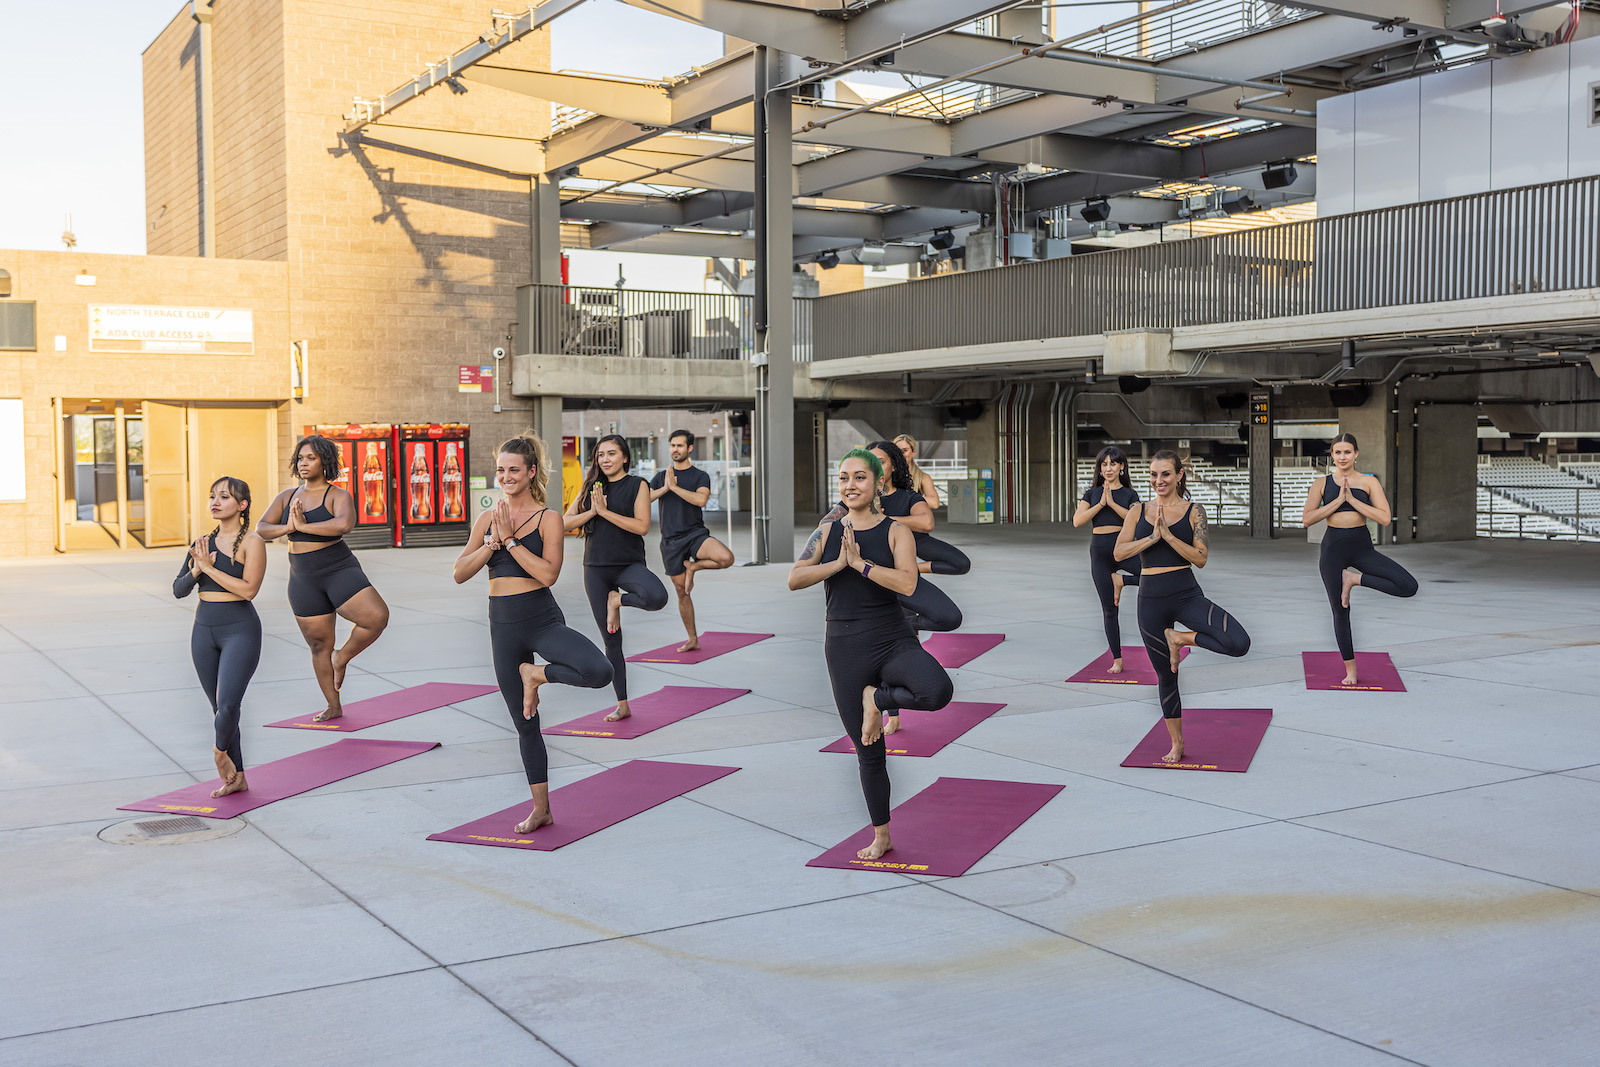 Yoga instructor wearing black fitness outfits gather in tree pose on the Sun Deck.